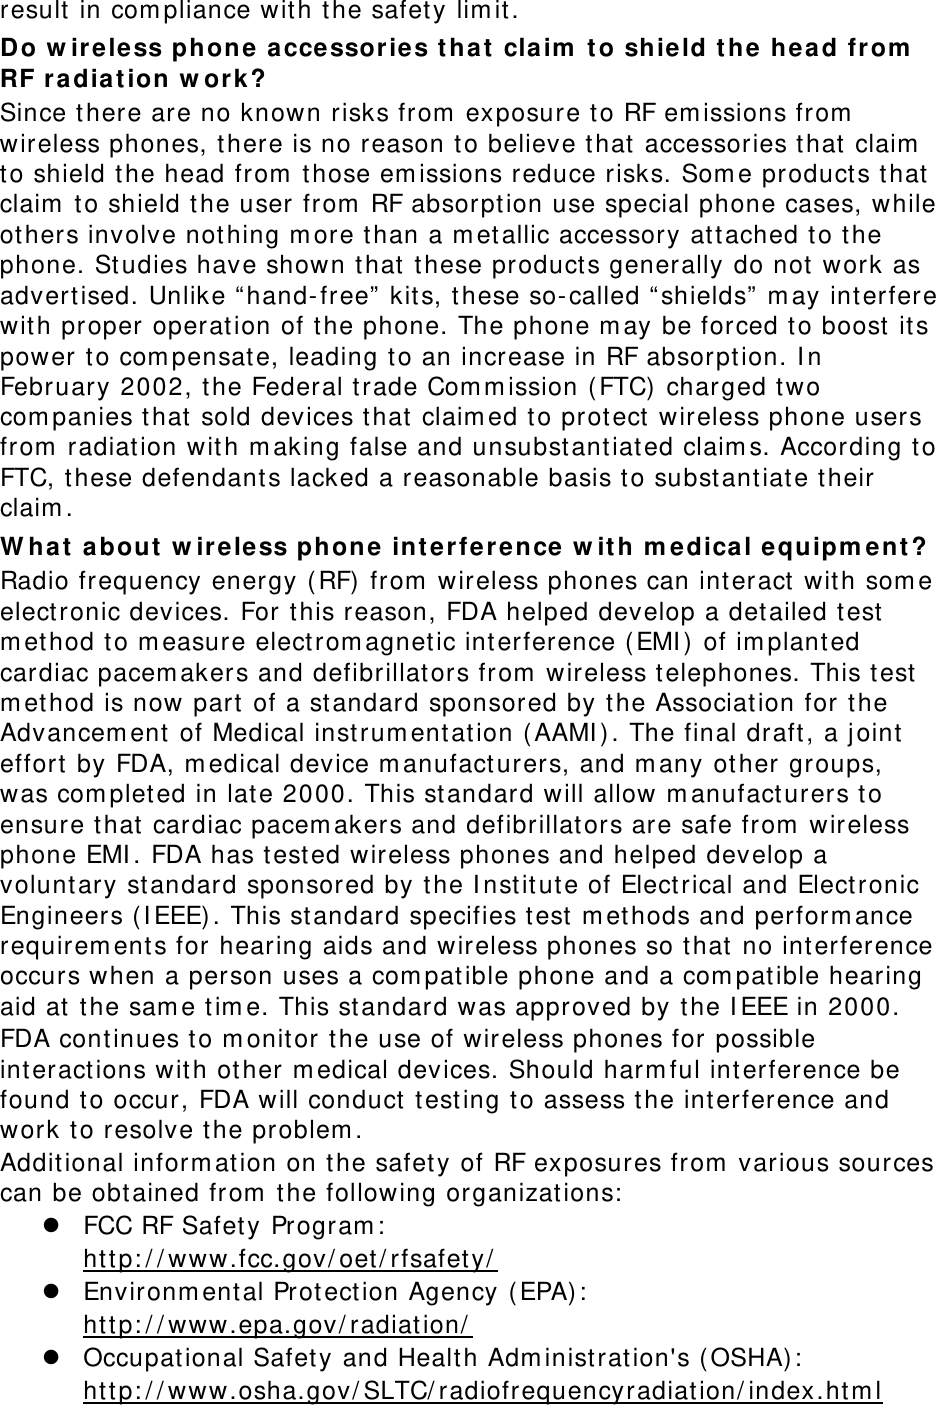 result  in com pliance wit h the safet y lim it . Do w ire less phone  accessor ies t ha t  claim  t o shield the  head from  RF radia t ion w ork? Since t here are no known risks from  exposure to RF em issions from  wireless phones, there is no reason to believe t hat  accessories that  claim  to shield the head from  those em issions reduce risks. Som e products that  claim  to shield the user from  RF absorpt ion use special phone cases, while ot hers involve not hing m ore than a m et allic accessory at t ached t o t he phone. St udies have shown t hat  t hese product s generally do not work as adver tised. Unlike “ hand-free”  kits, these so-called “shields”  m ay int erfere with proper operat ion of the phone. The phone m ay be forced to boost  it s power t o com pensat e, leading to an increase in RF absorpt ion. I n February 2002, the Federal trade Com m ission (FTC) charged two com panies that  sold devices that claim ed to prot ect  wireless phone users from  radiat ion wit h m aking false and unsubst antiat ed claim s. According t o FTC, these defendants lacked a reasonable basis t o subst ant iate t heir claim . W hat a bout  w ire le ss phon e int er fere nce w ith m e dica l e quipm e nt ? Radio frequency ener gy (RF)  from  wir eless phones can interact  with som e electronic devices. For  this reason, FDA helped develop a det ailed t est  m et hod to m easure elect rom agnet ic int erference ( EMI )  of im planted cardiac pacem akers and defibrillat ors from  wireless telephones. This t est  m et hod is now part of a standard sponsored by the Association for t he Advancem ent  of Medical instrum entat ion (AAMI ) . The final draft , a j oint  effort  by FDA, m edical device m anufact urers, and m any ot her groups, was com plet ed in late 2000. This st andard will allow m anufact urers to ensure t hat  cardiac pacem akers and defibrillat ors are safe from  wireless phone EMI . FDA has tested wireless phones and helped develop a voluntary st andard sponsored by t he I nstit ut e of Elect rical and Elect ronic Engineers ( I EEE). This standard specifies test m et hods and perform ance requirements for hearing aids and wireless phones so t hat  no int erference occurs when a person uses a com pat ible phone and a com patible hearing aid at  t he sam e t im e. This st andard was approved by the I EEE in 2000. FDA continues to m onitor the use of wir eless phones for possible interact ions wit h ot her  m edical devices. Should harm ful interference be found to occur, FDA will conduct test ing t o assess the interference and work to resolve the problem . Addit ional inform ation on t he safety of RF exposures from  various sources can be obtained from  the following organizat ions:   FCC RF Safet y Program :   http: / / www.fcc.gov/ oet / rfsafet y/   Environm ental Prot ection Agency  (EPA) :   http: / / www.epa.gov/ radiat ion/   Occupational Safet y and Health Adm inist rat ion&apos;s ( OSHA) :         http: / / www.osha.gov/ SLTC/ radiofrequencyradiation/ index .ht m l 